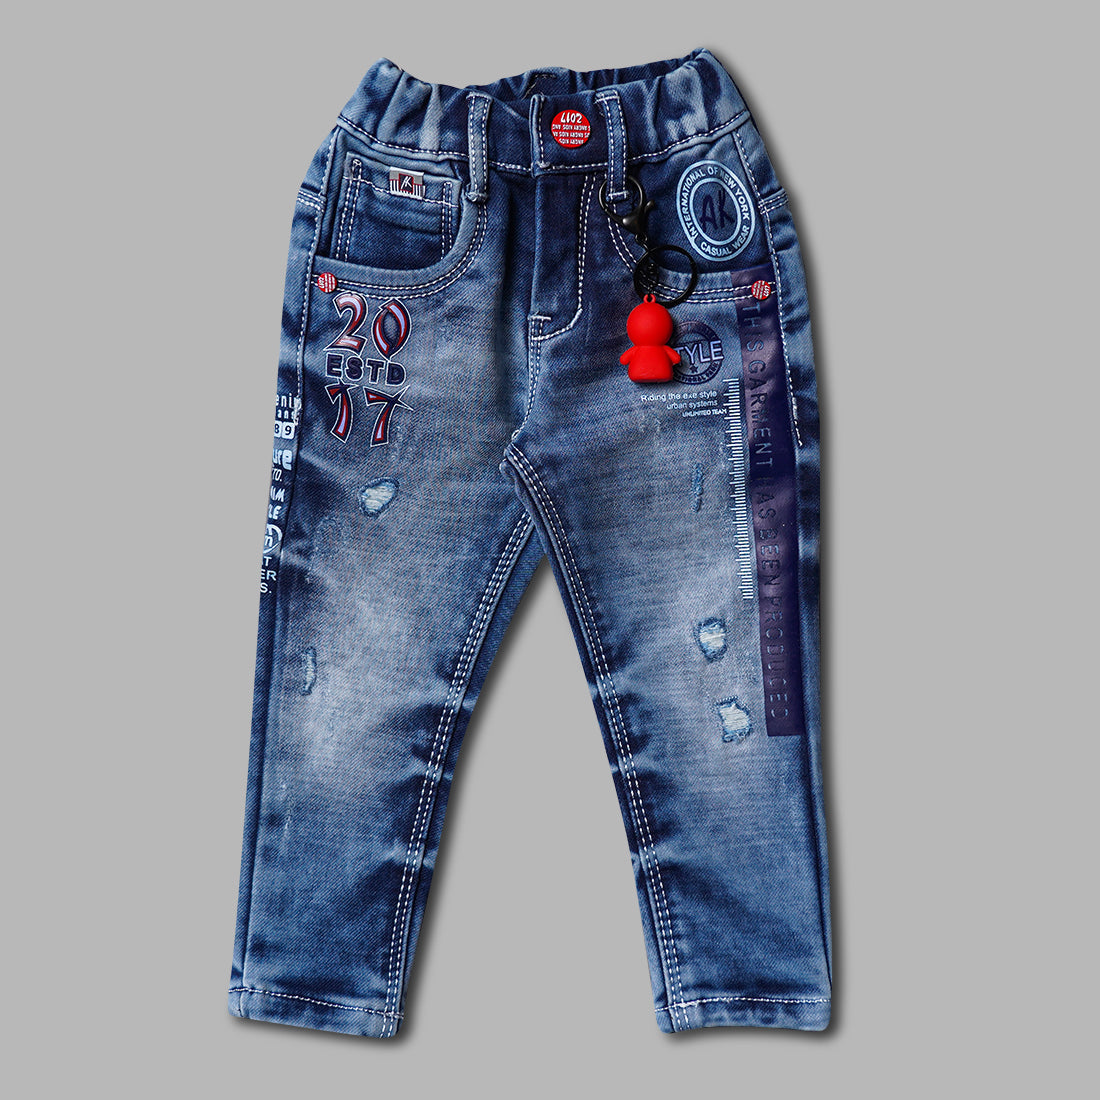 Kids Baby Boys Girl Denim Clothes Clothing Pants Bottoms Trousers Jeans  Overalls | eBay